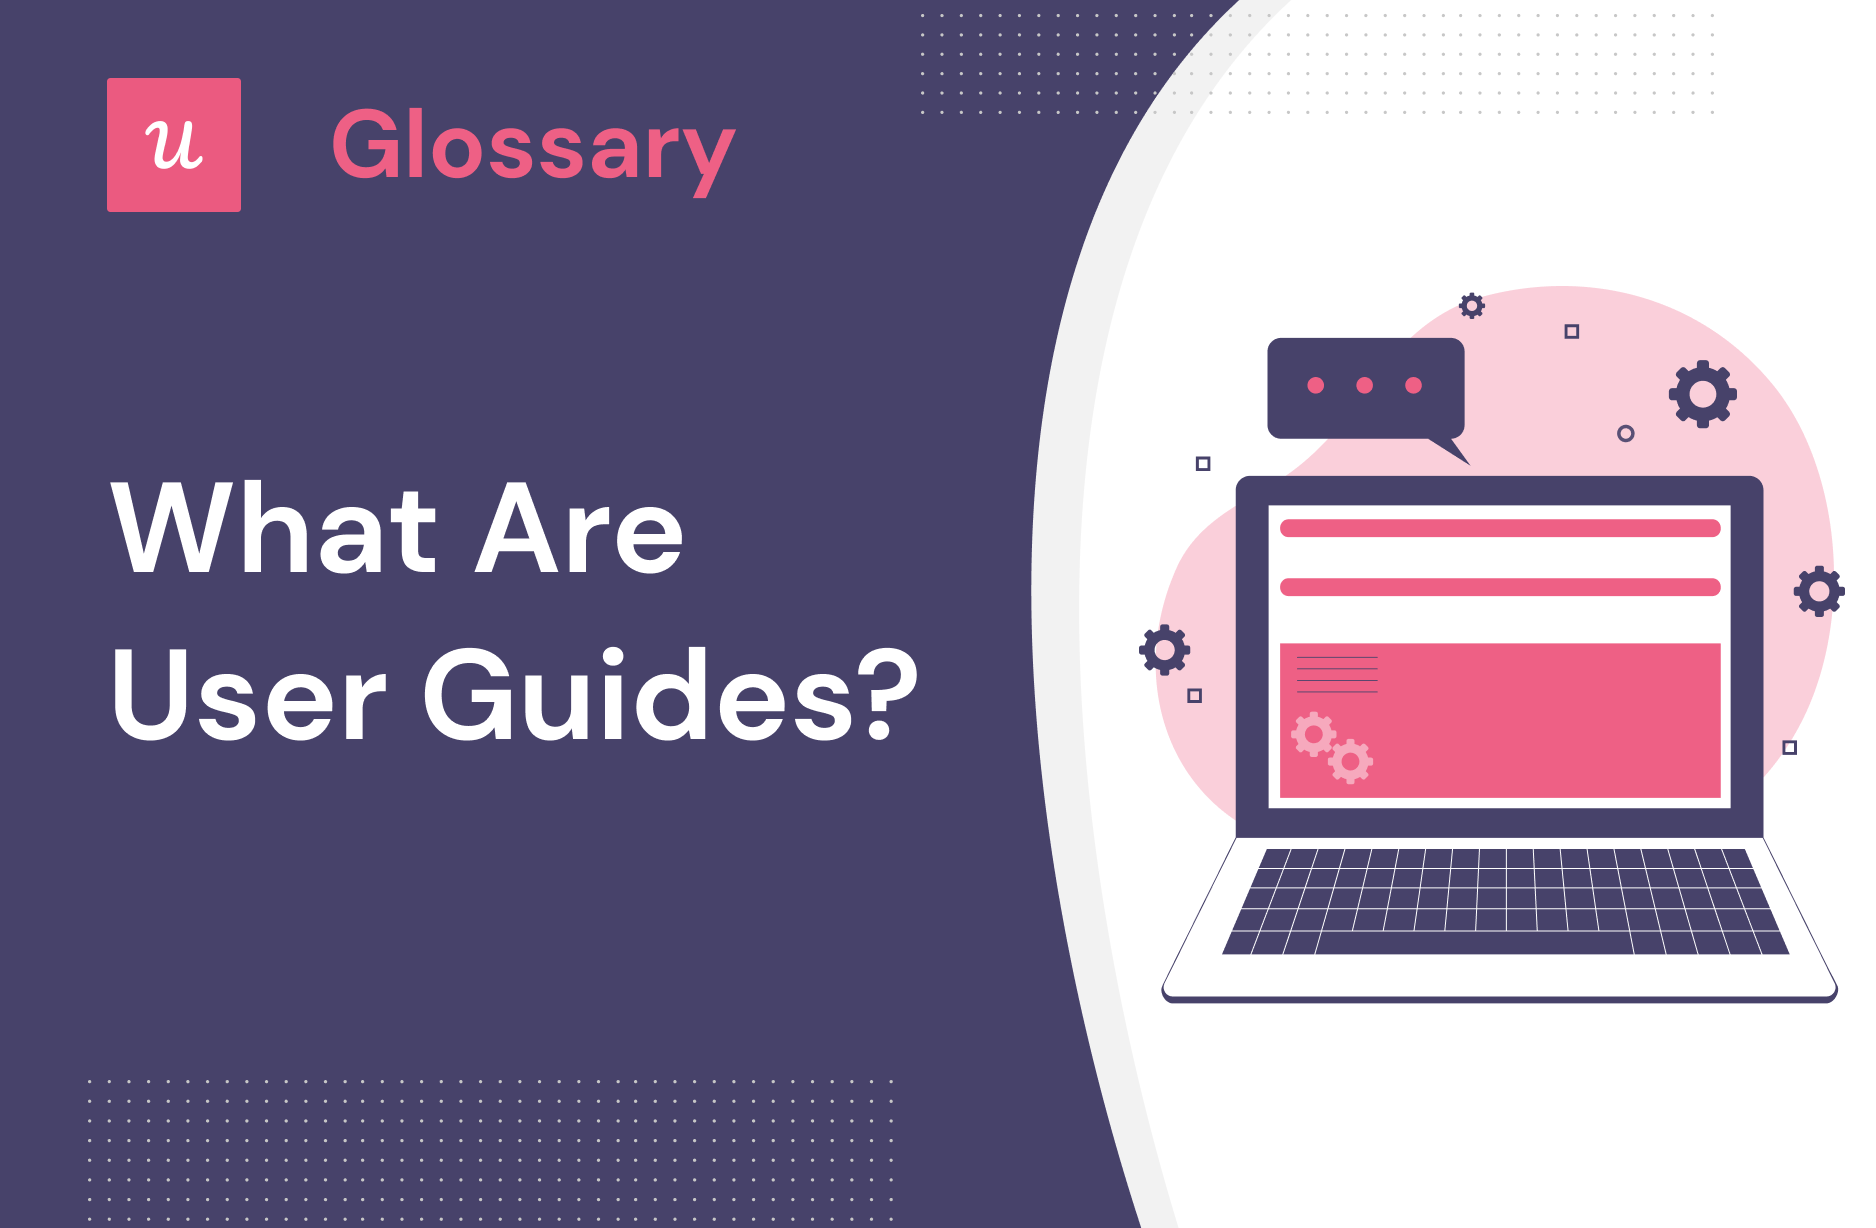 What are User Guides?